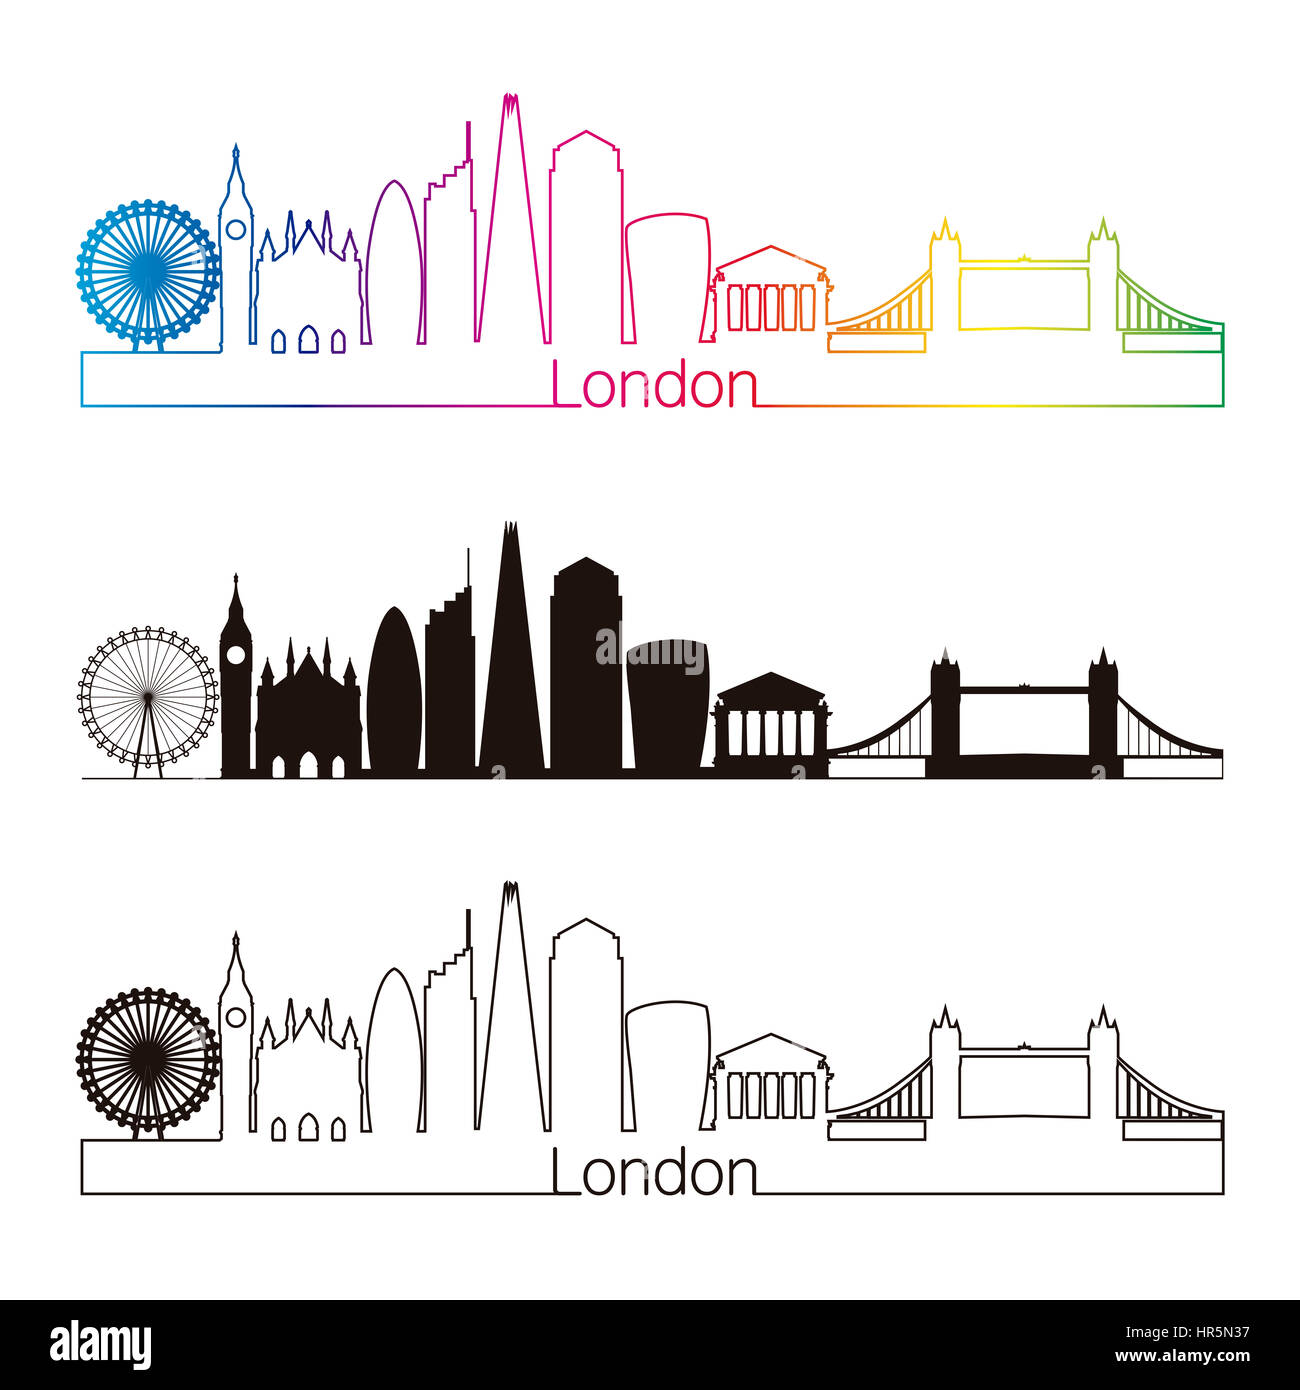 London skyline silhouette Cut Out Stock Images & Pictures - Alamy